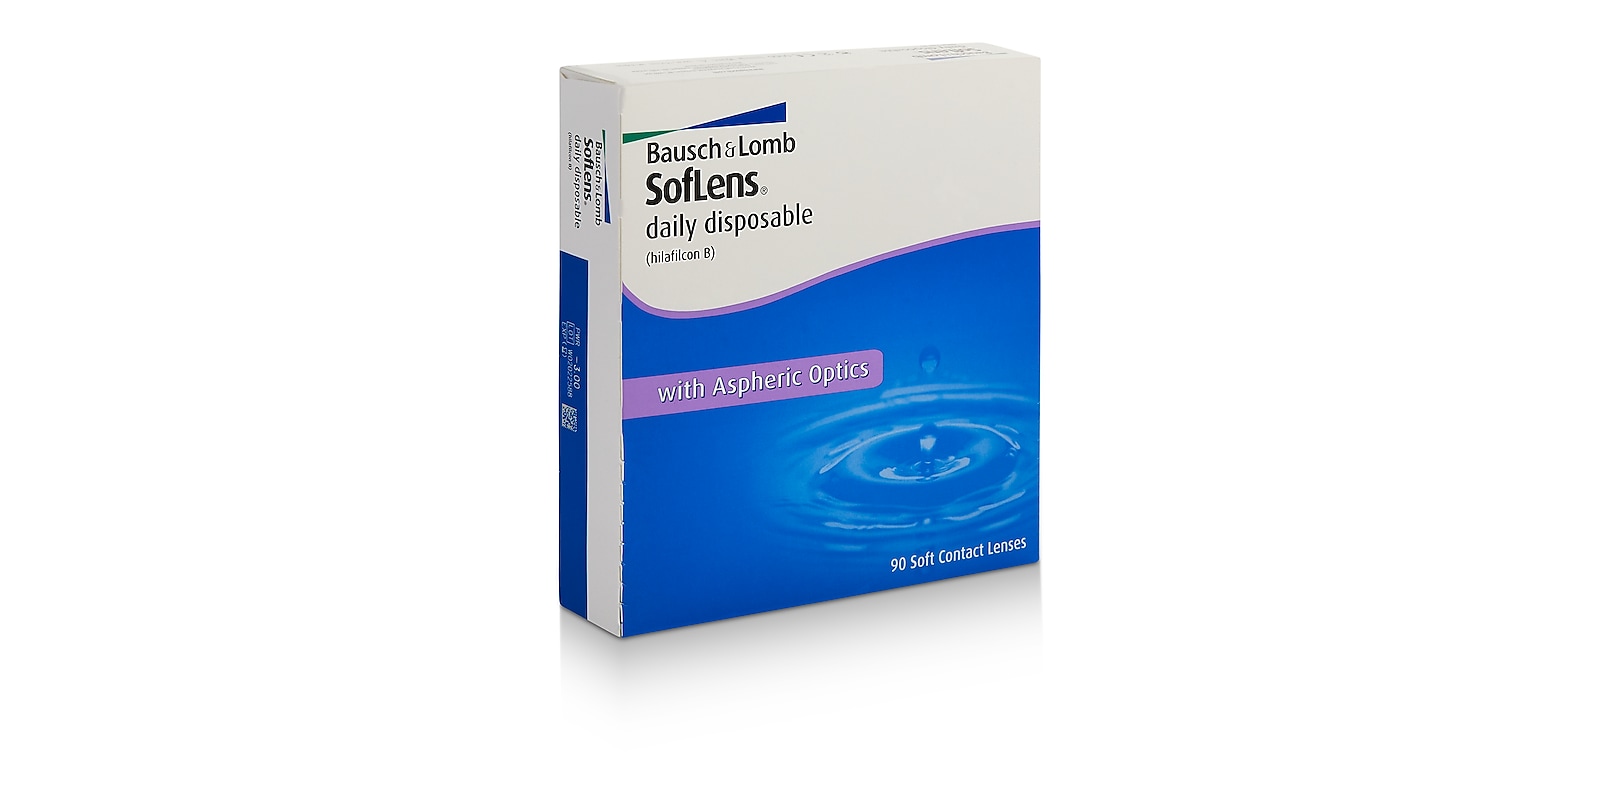 SofLens Daily Disposable, 90 pack contact lenses